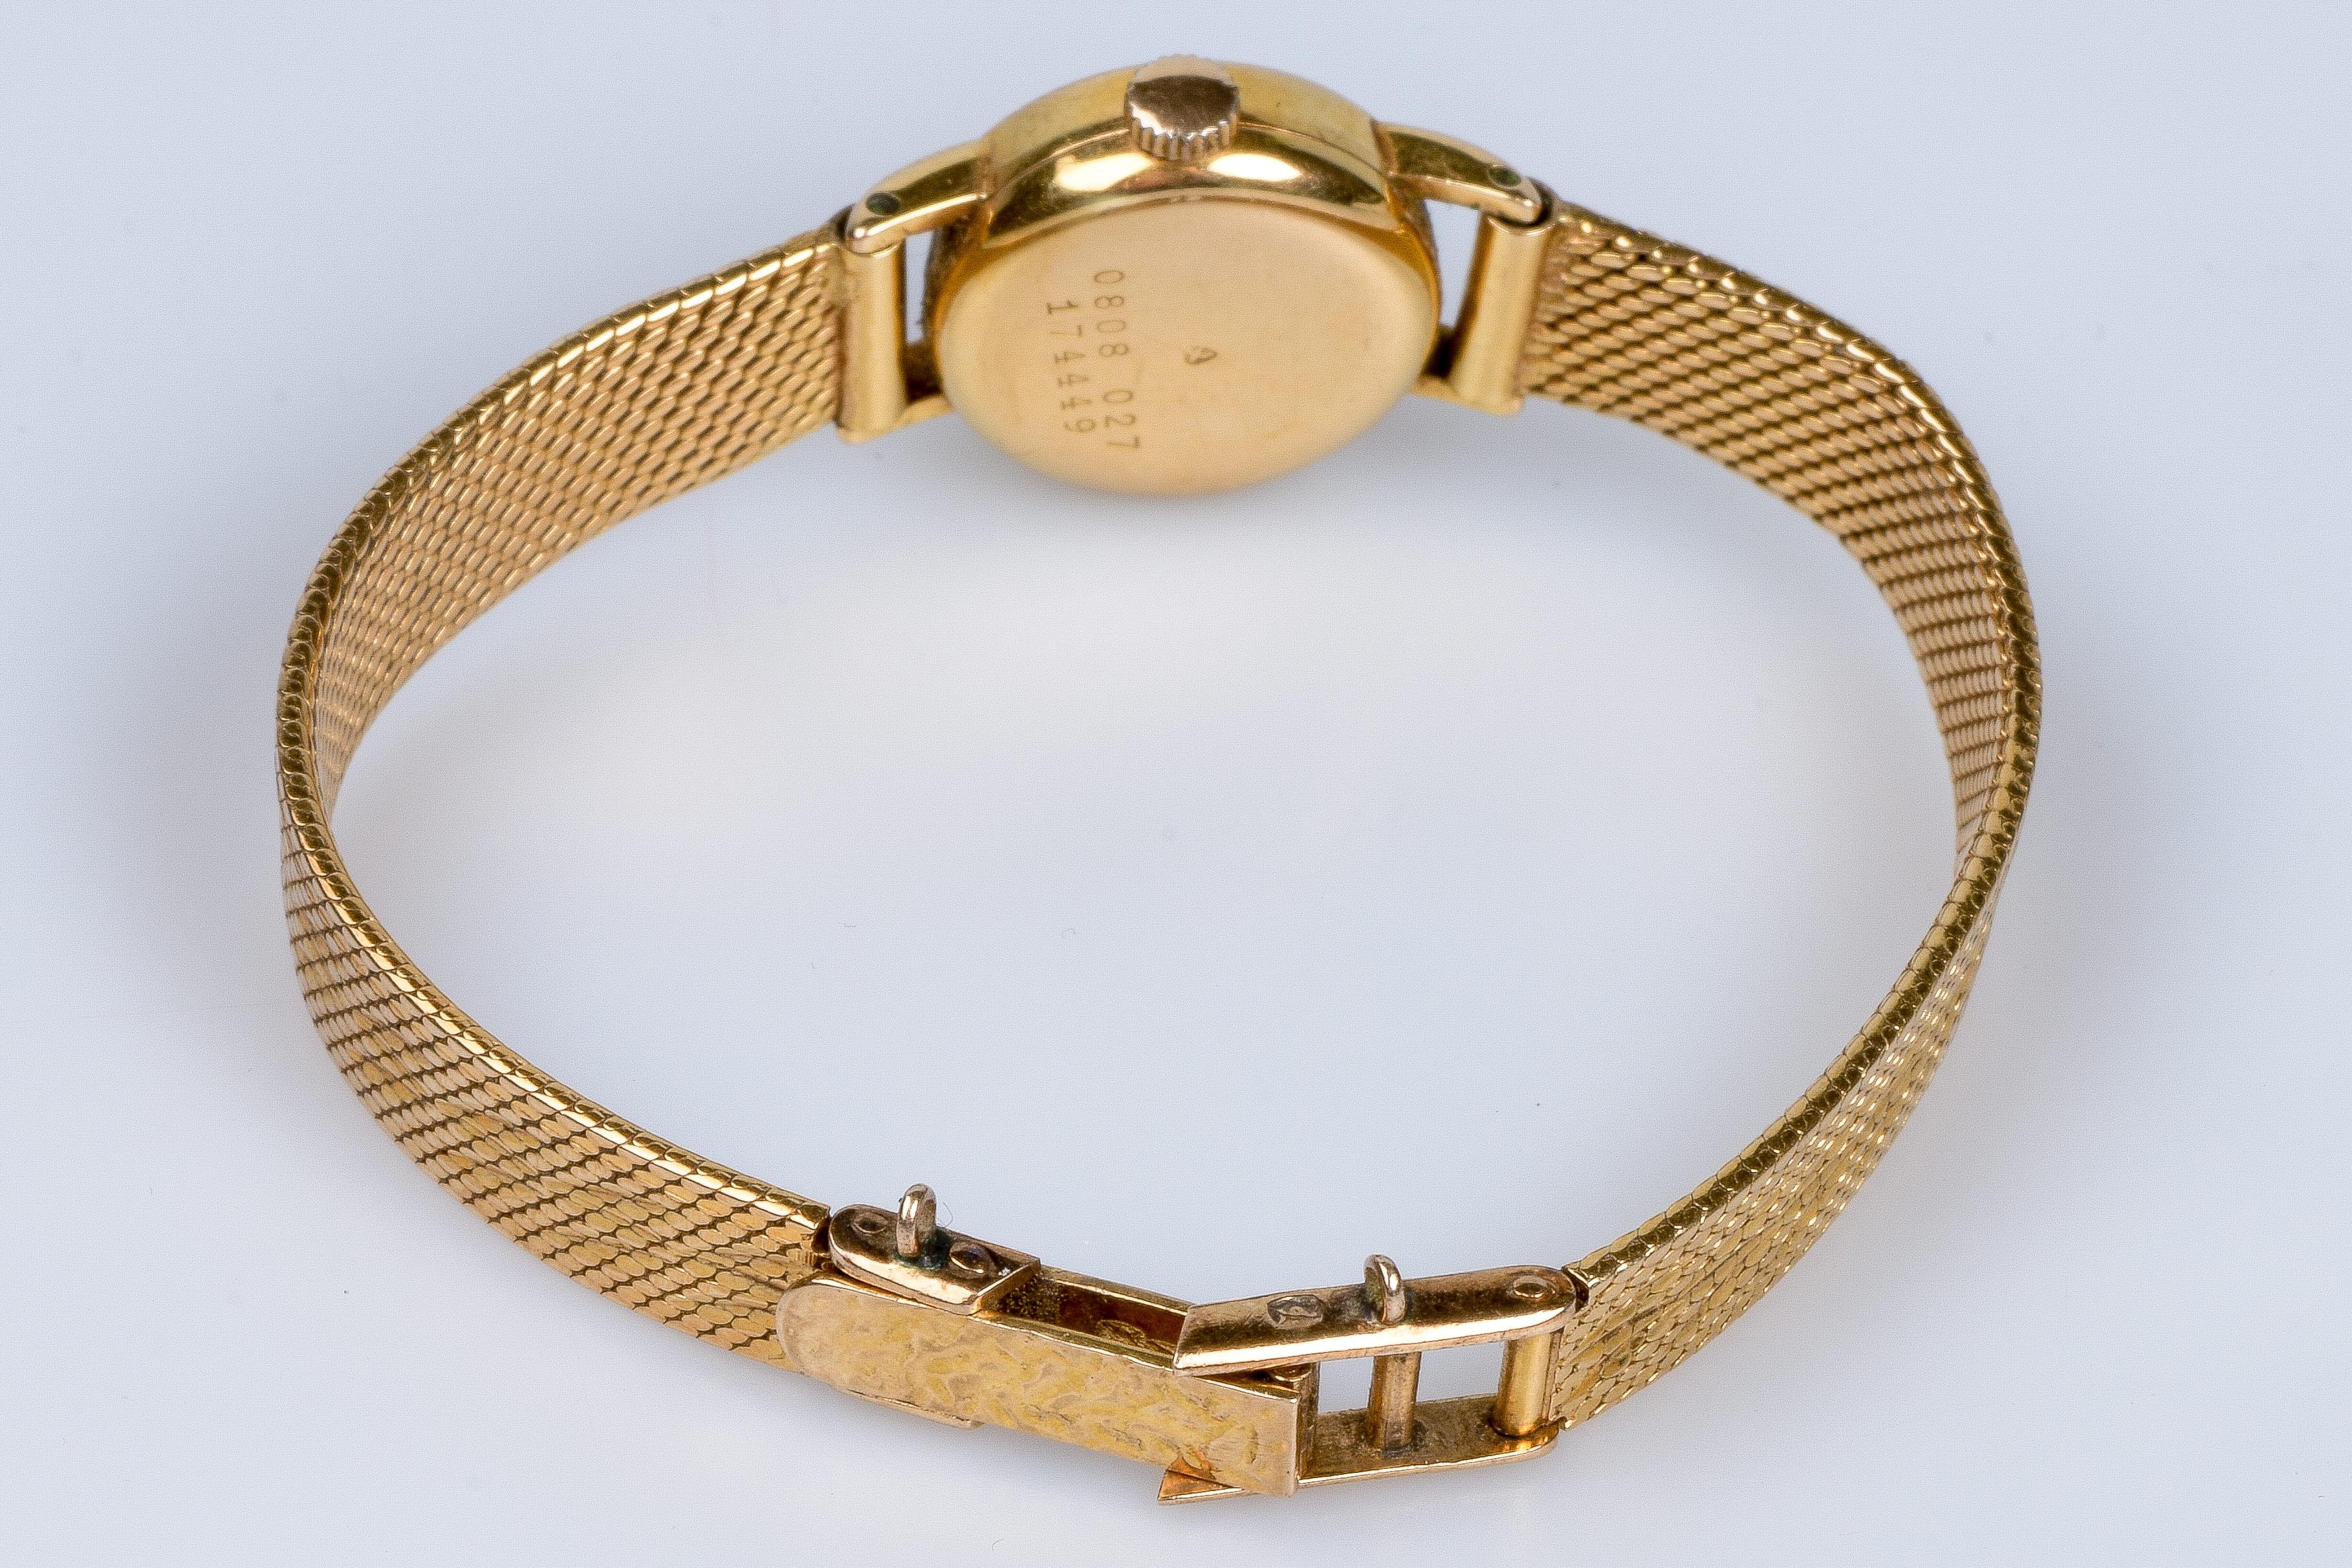 CERTINA's watch in 18carats yellow gold with a soft decorated fine mesh bracelet 5